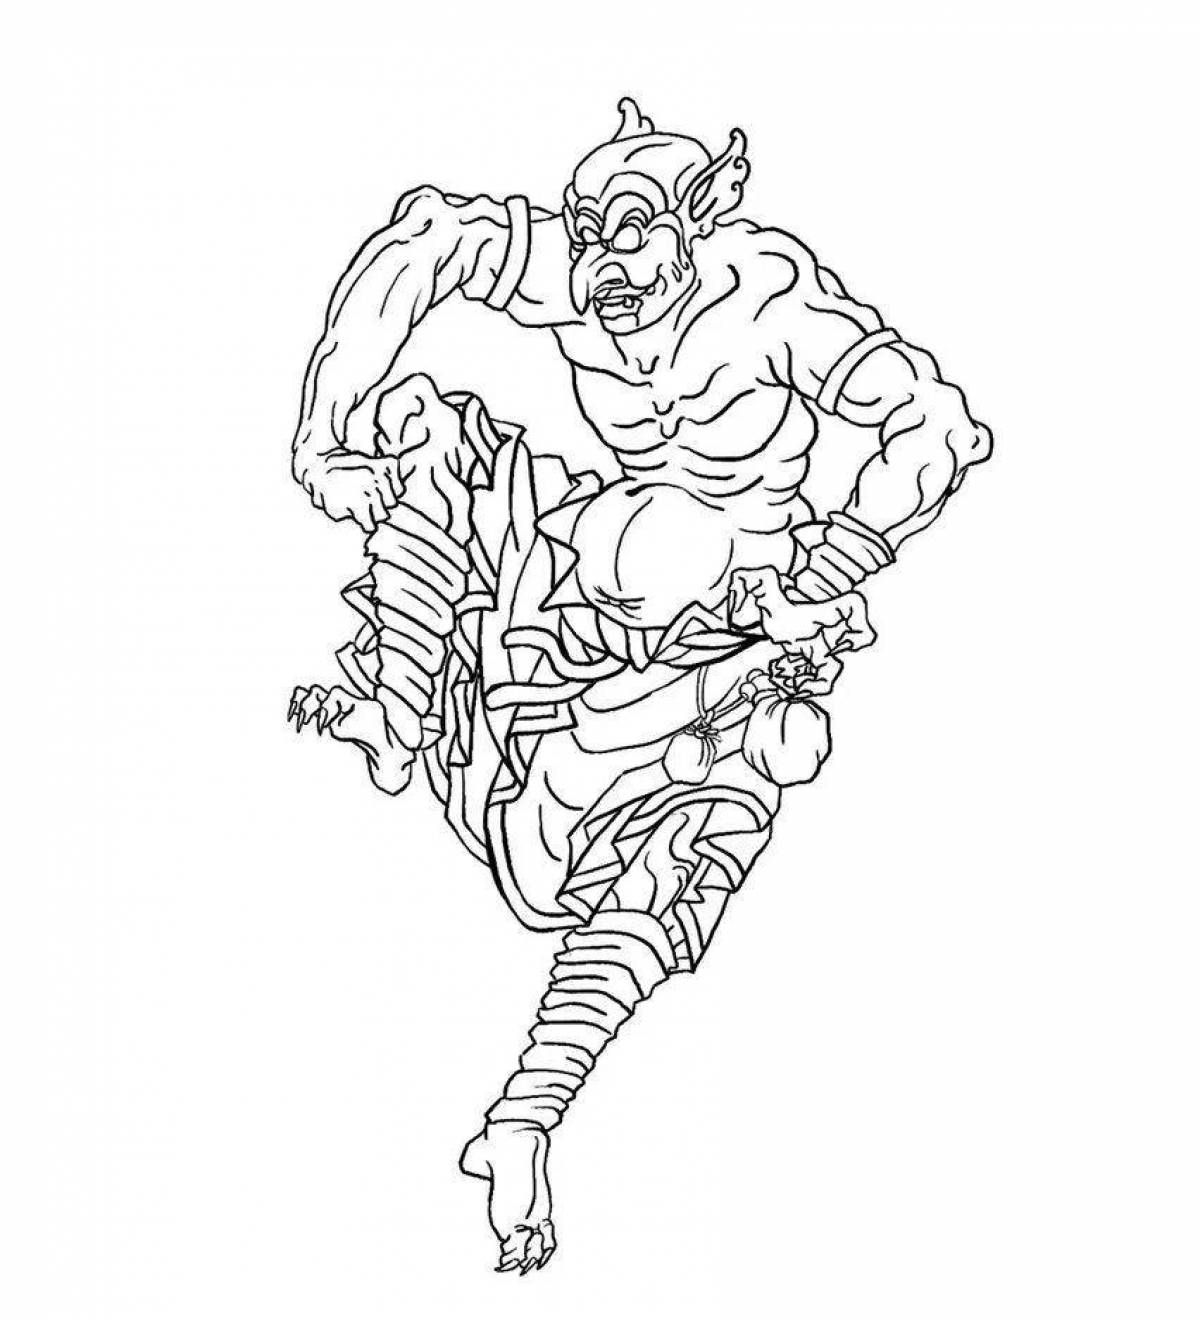 Glossy goblin core coloring page